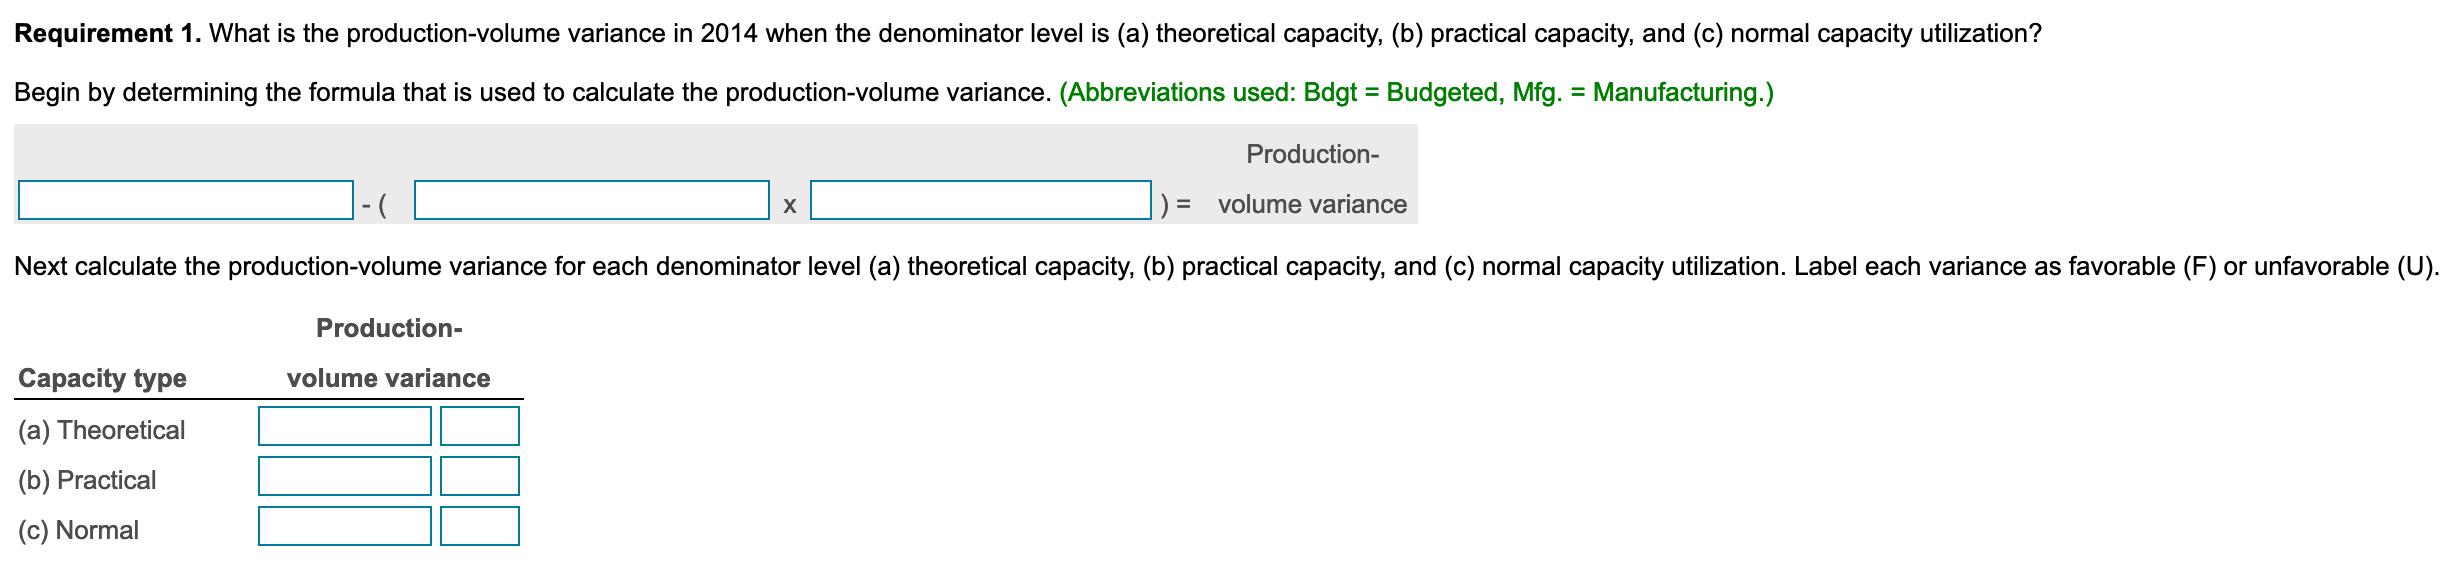 Requirement 1. What is the production-volume variance in 2014 when the denominator level is (a) theoretical capacity, (b) pra